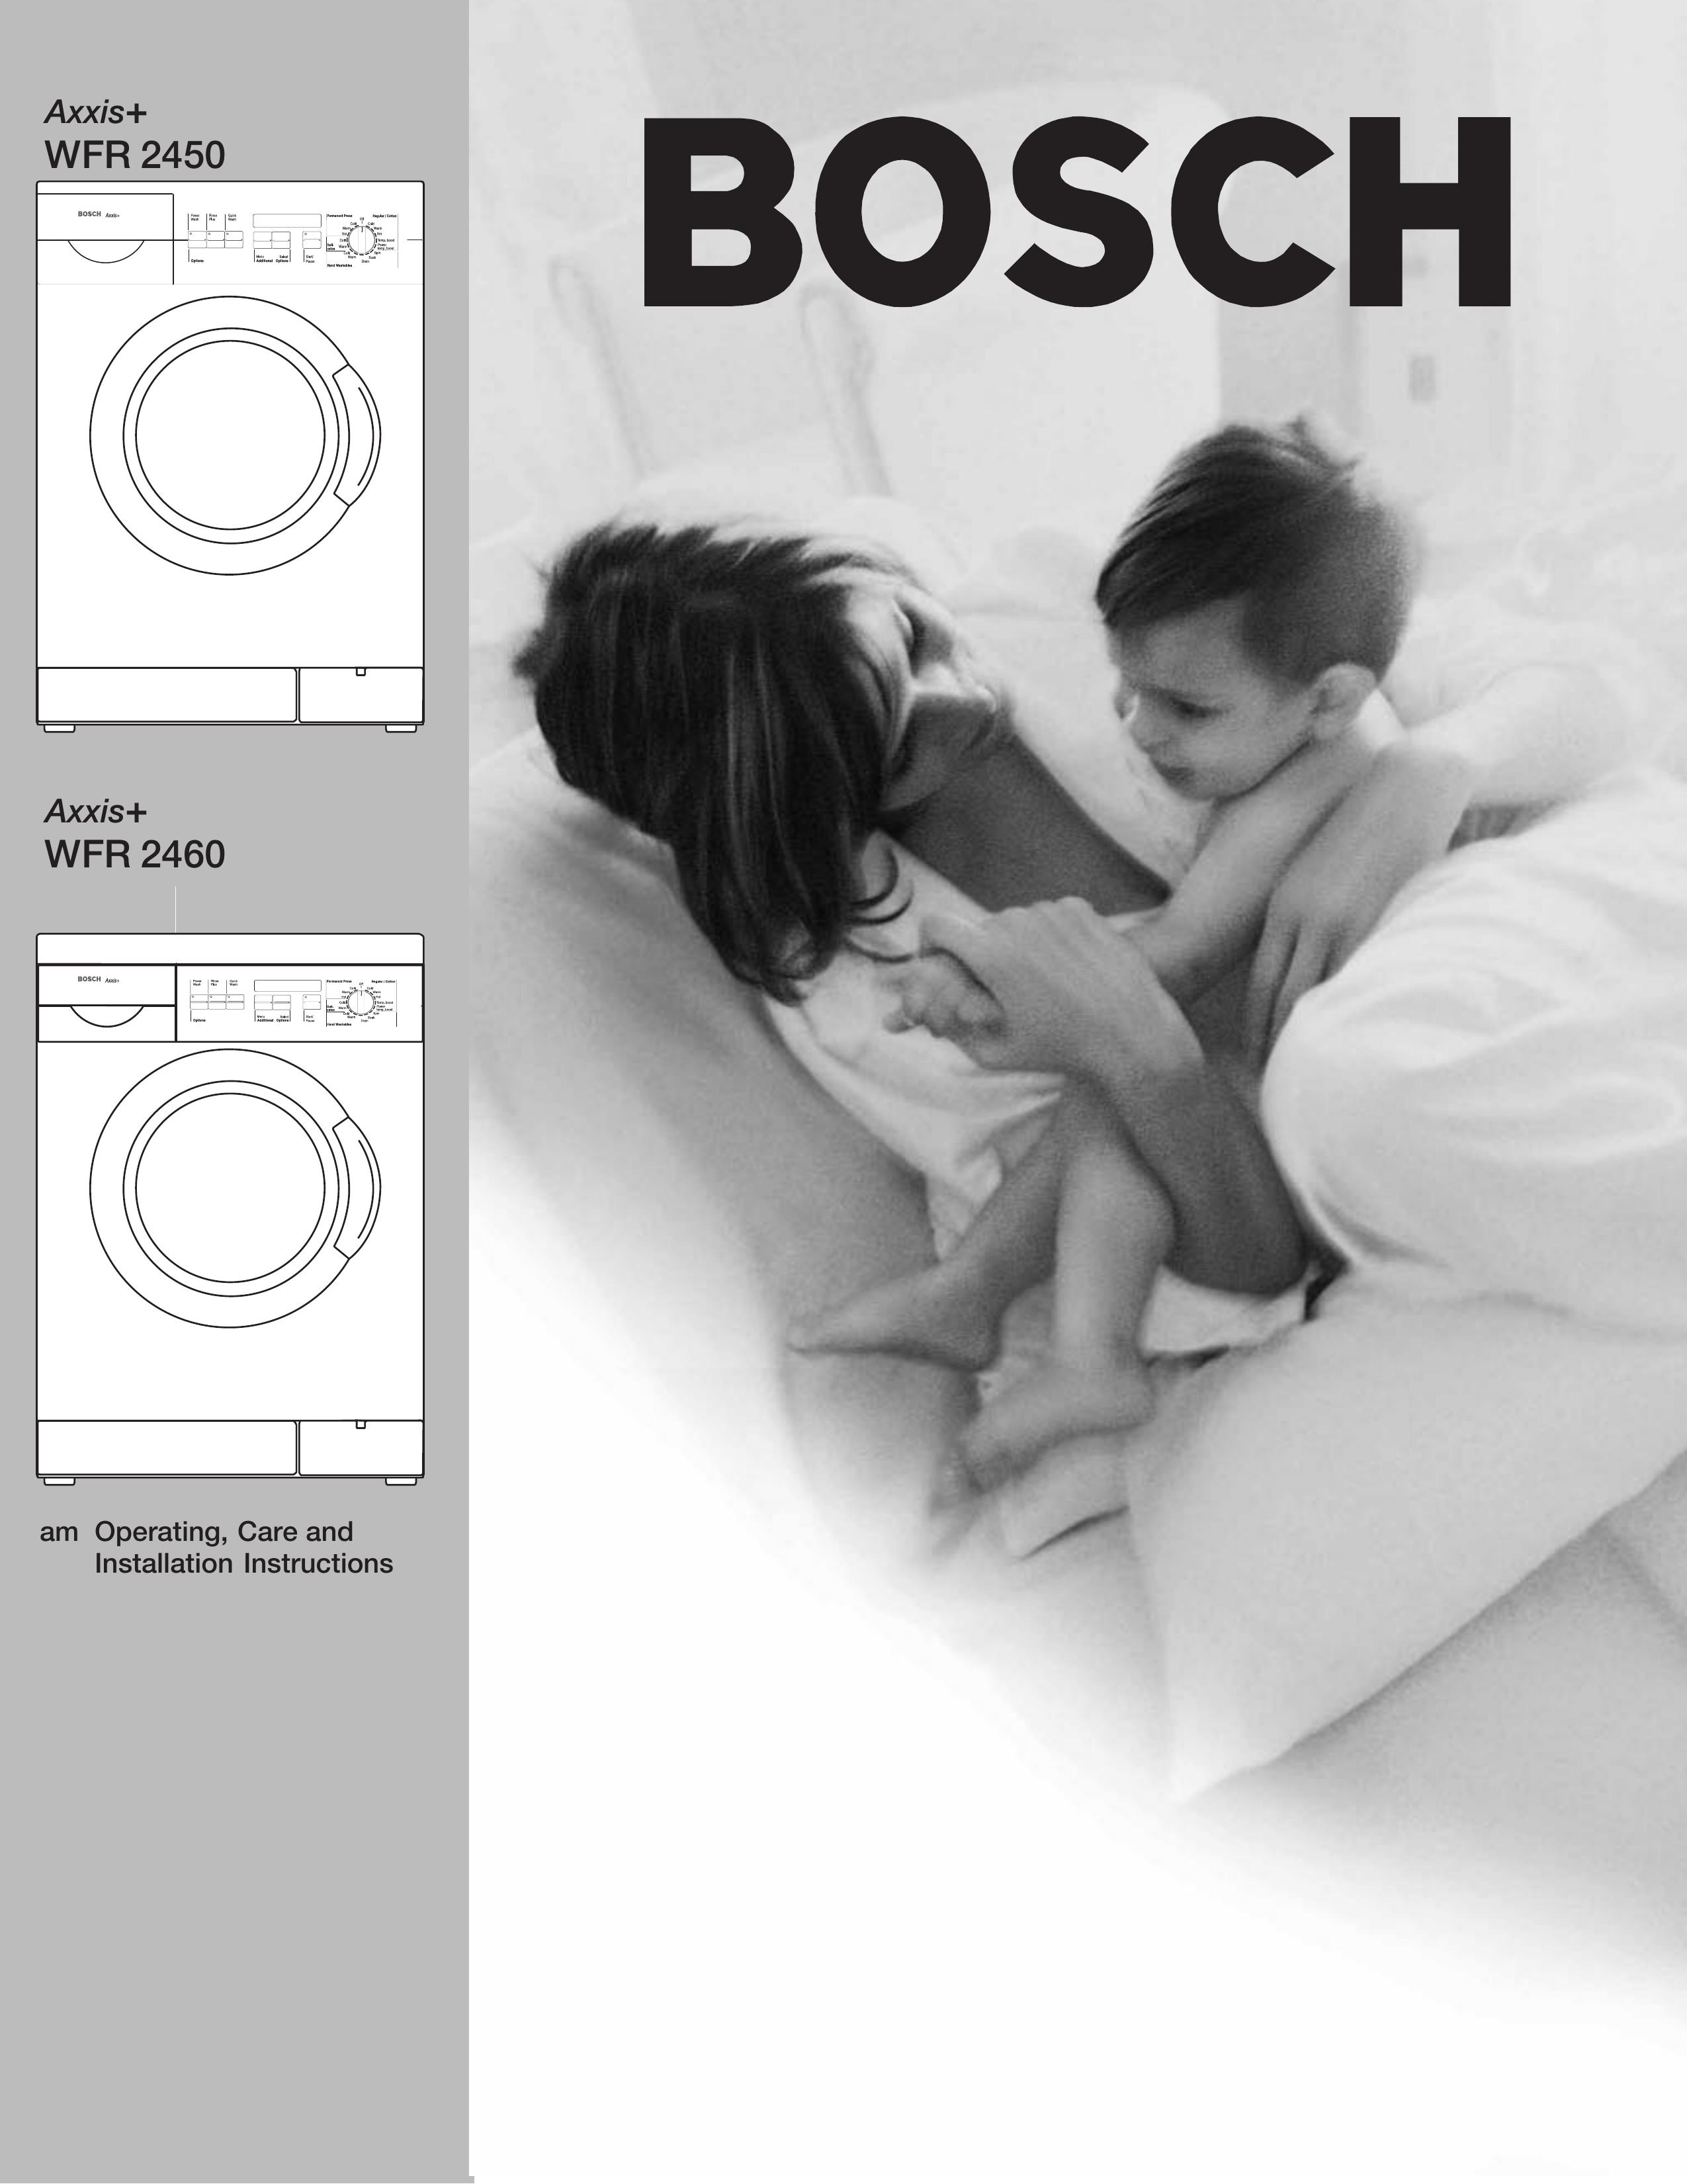 Bosch Appliances Axxis+ WFR 2450 Washer User Manual